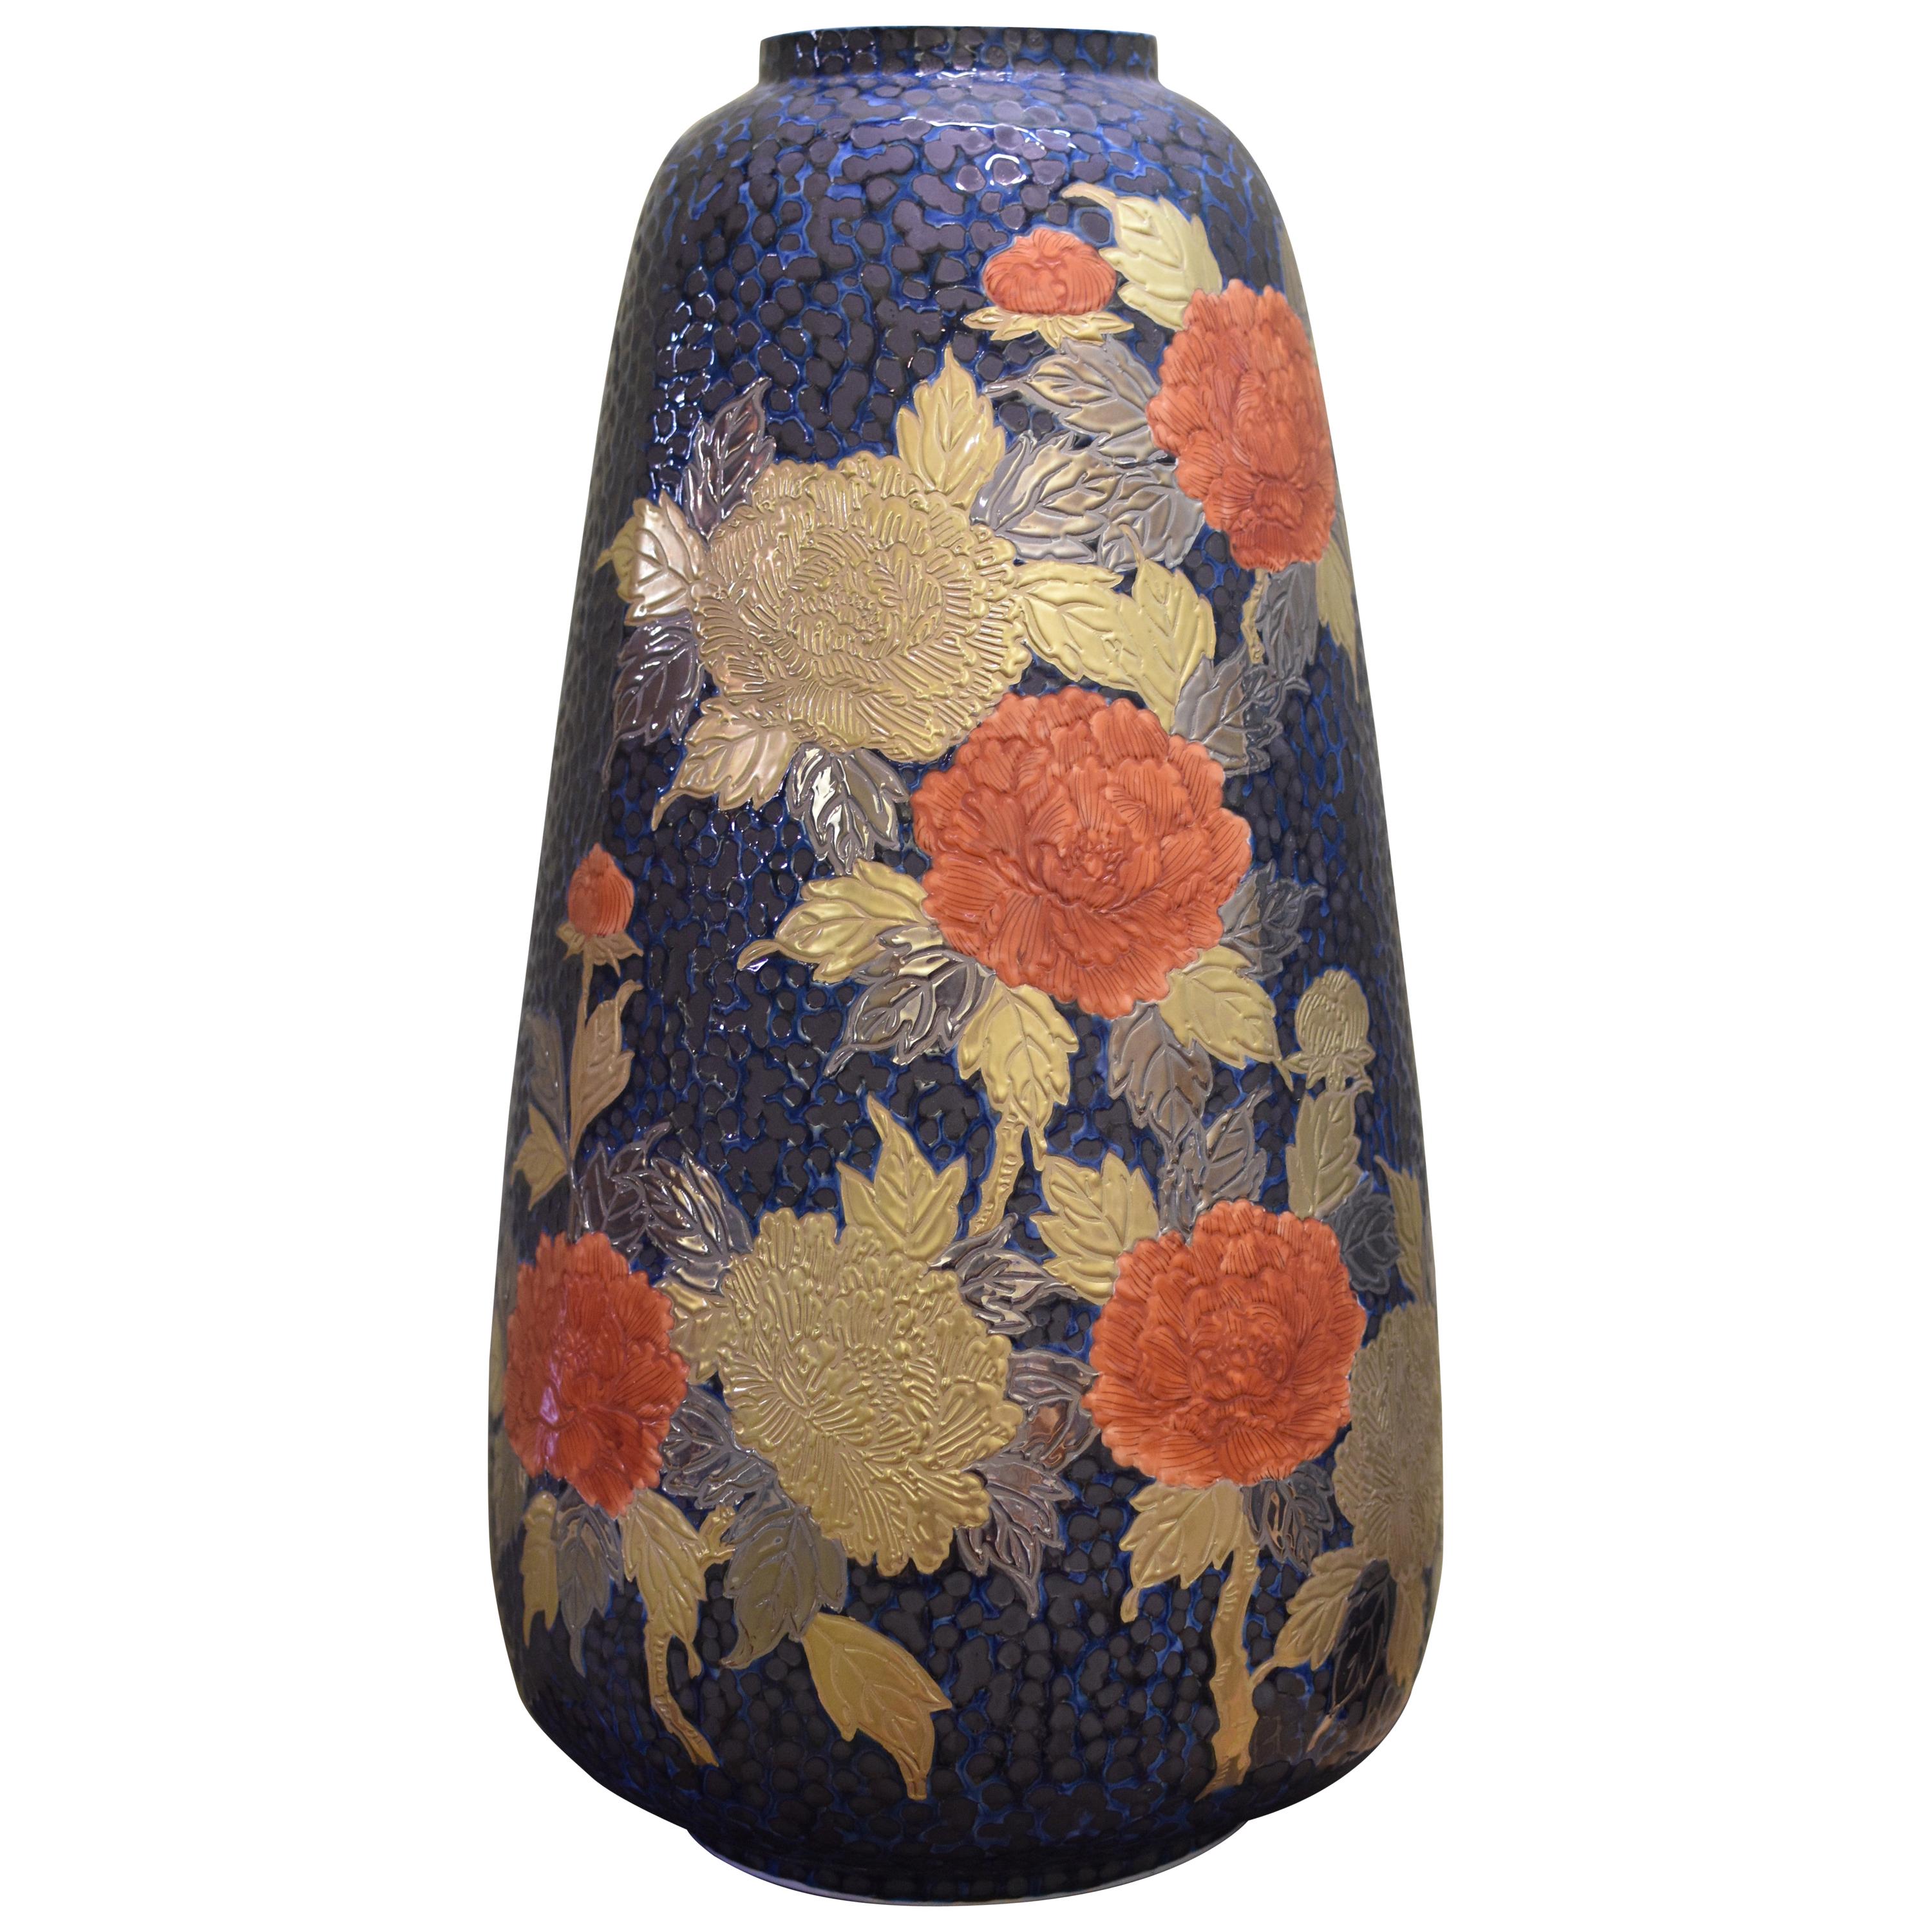 Outstanding very large Japanese contemporary dimpled Imari Porcelain vase, hand painted in vivid red, platinum and gold on a gracefully shaped porcelain body, a stunning piece by widely respected master porcelain artist in Imari-Arita tradition and